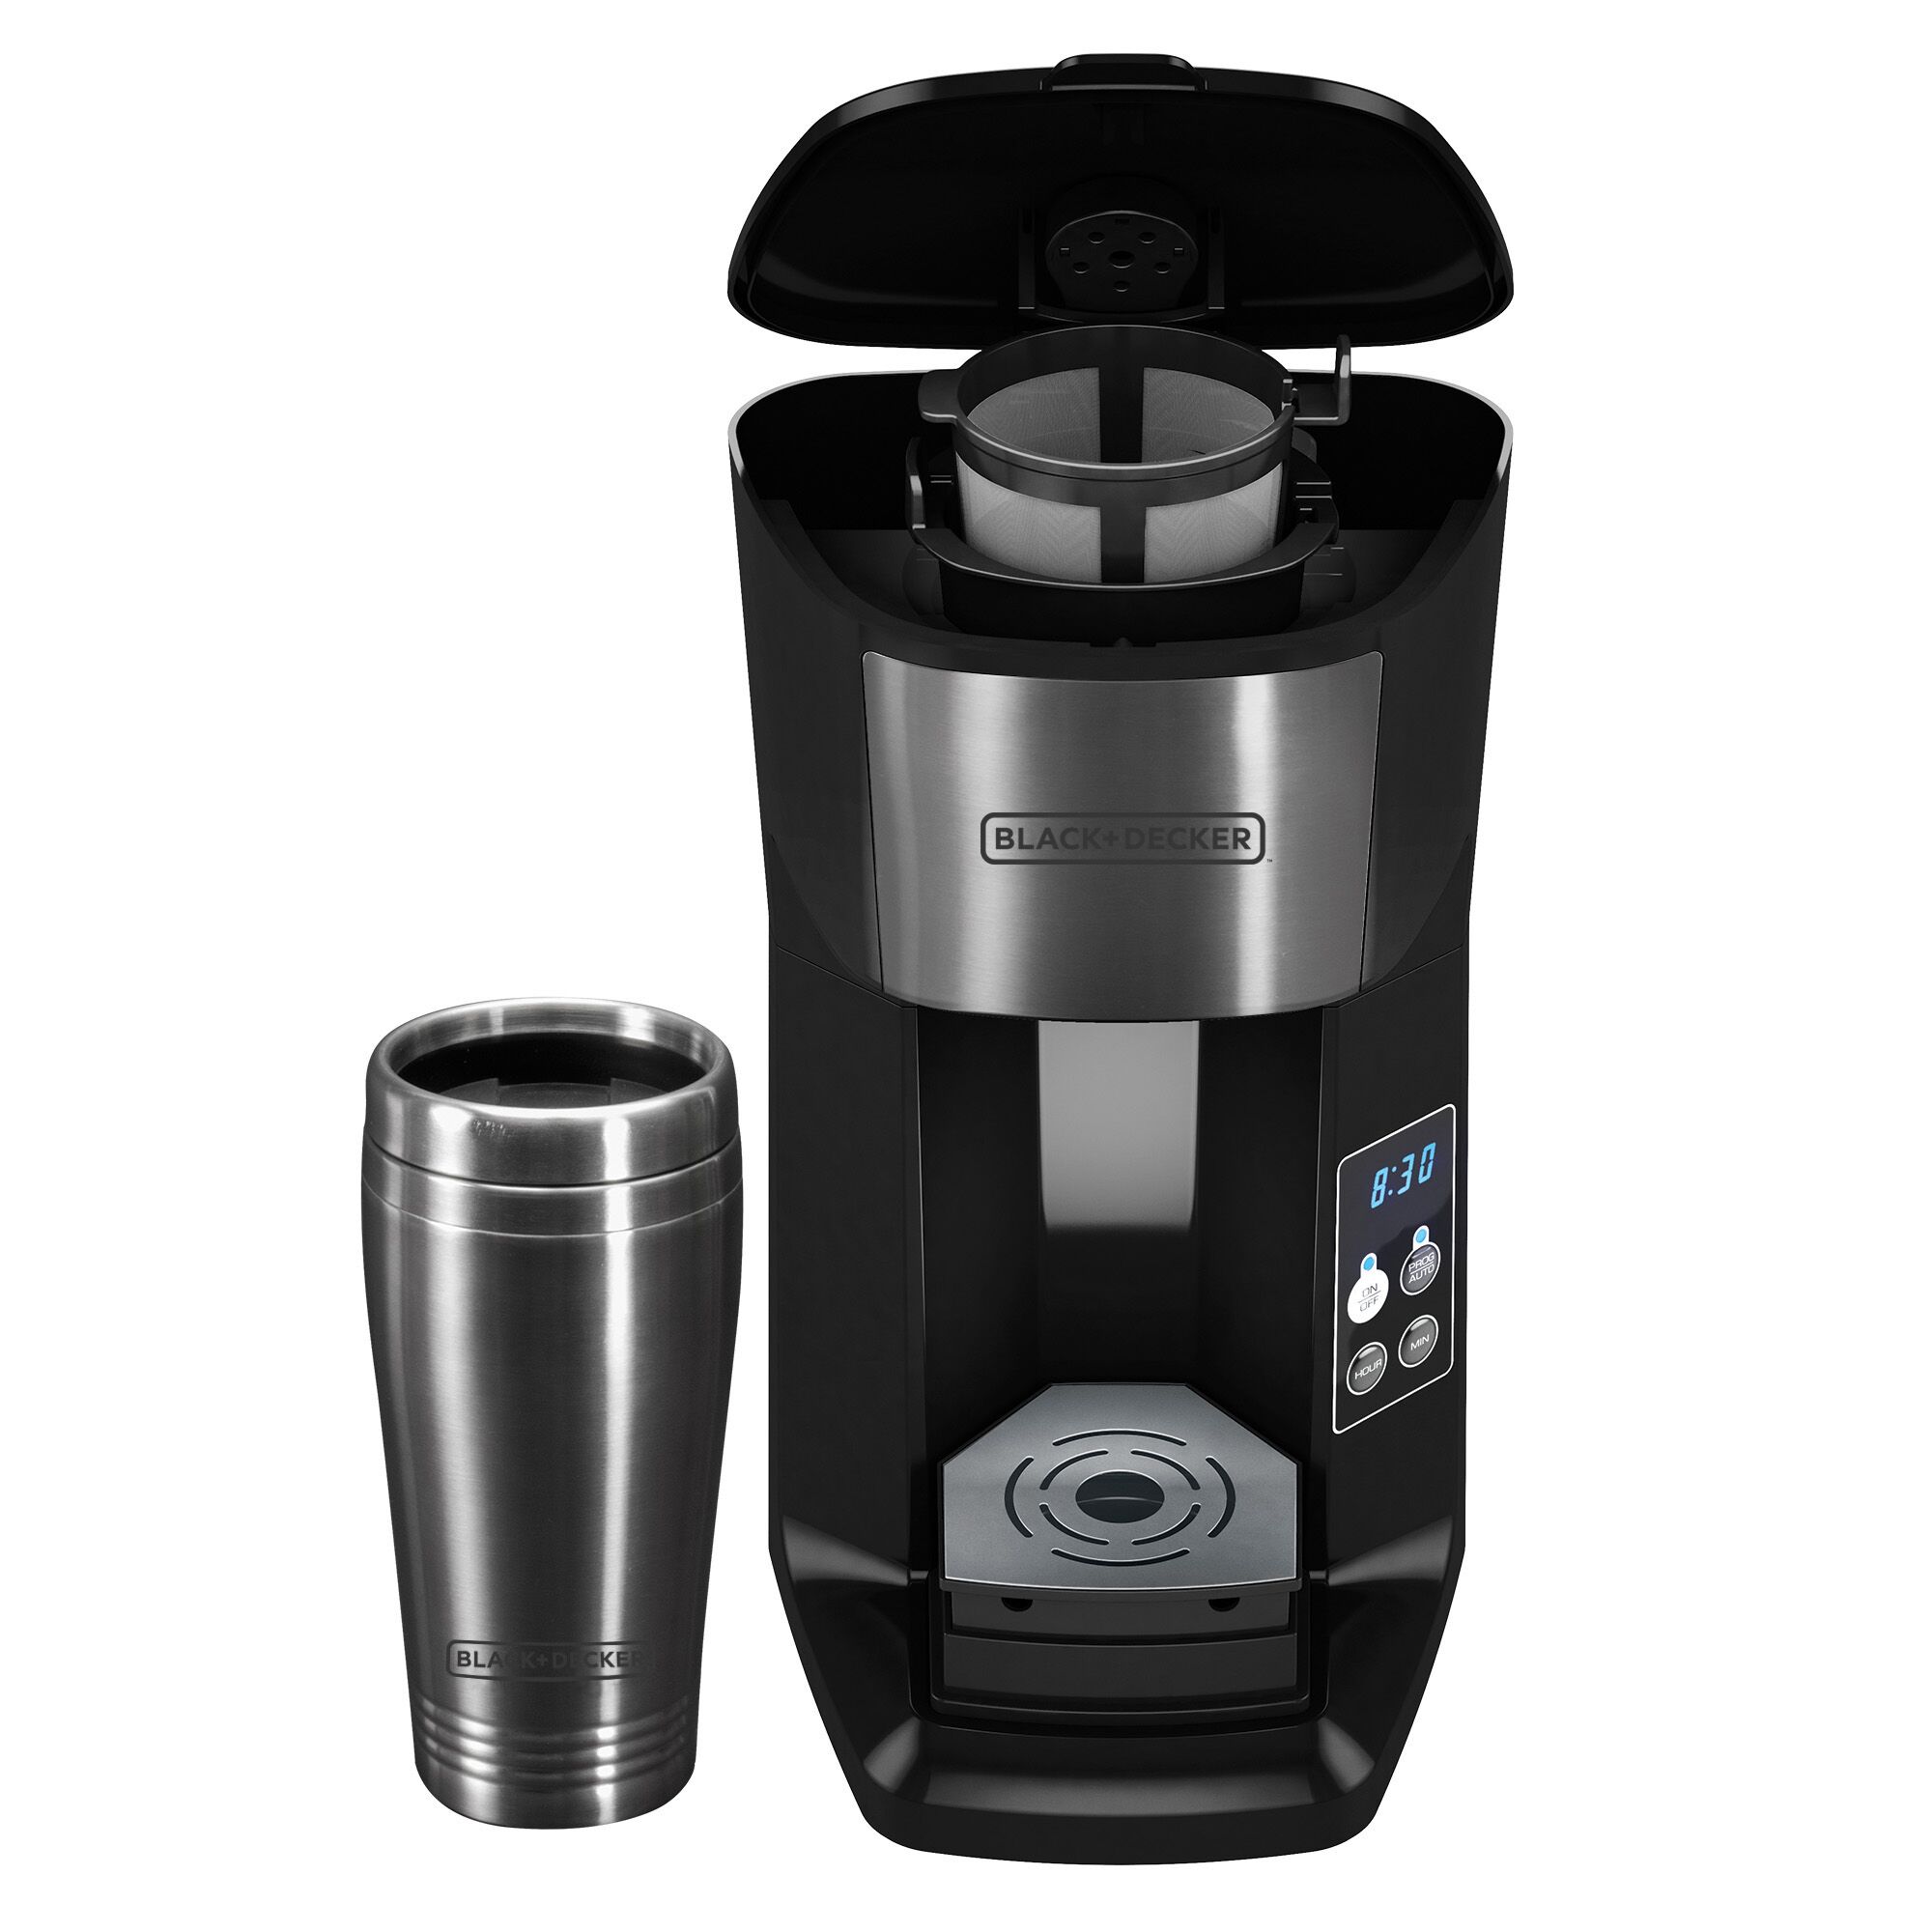 Profile of the BLACK+DECKER single serve coffee maker with top water reservoir open